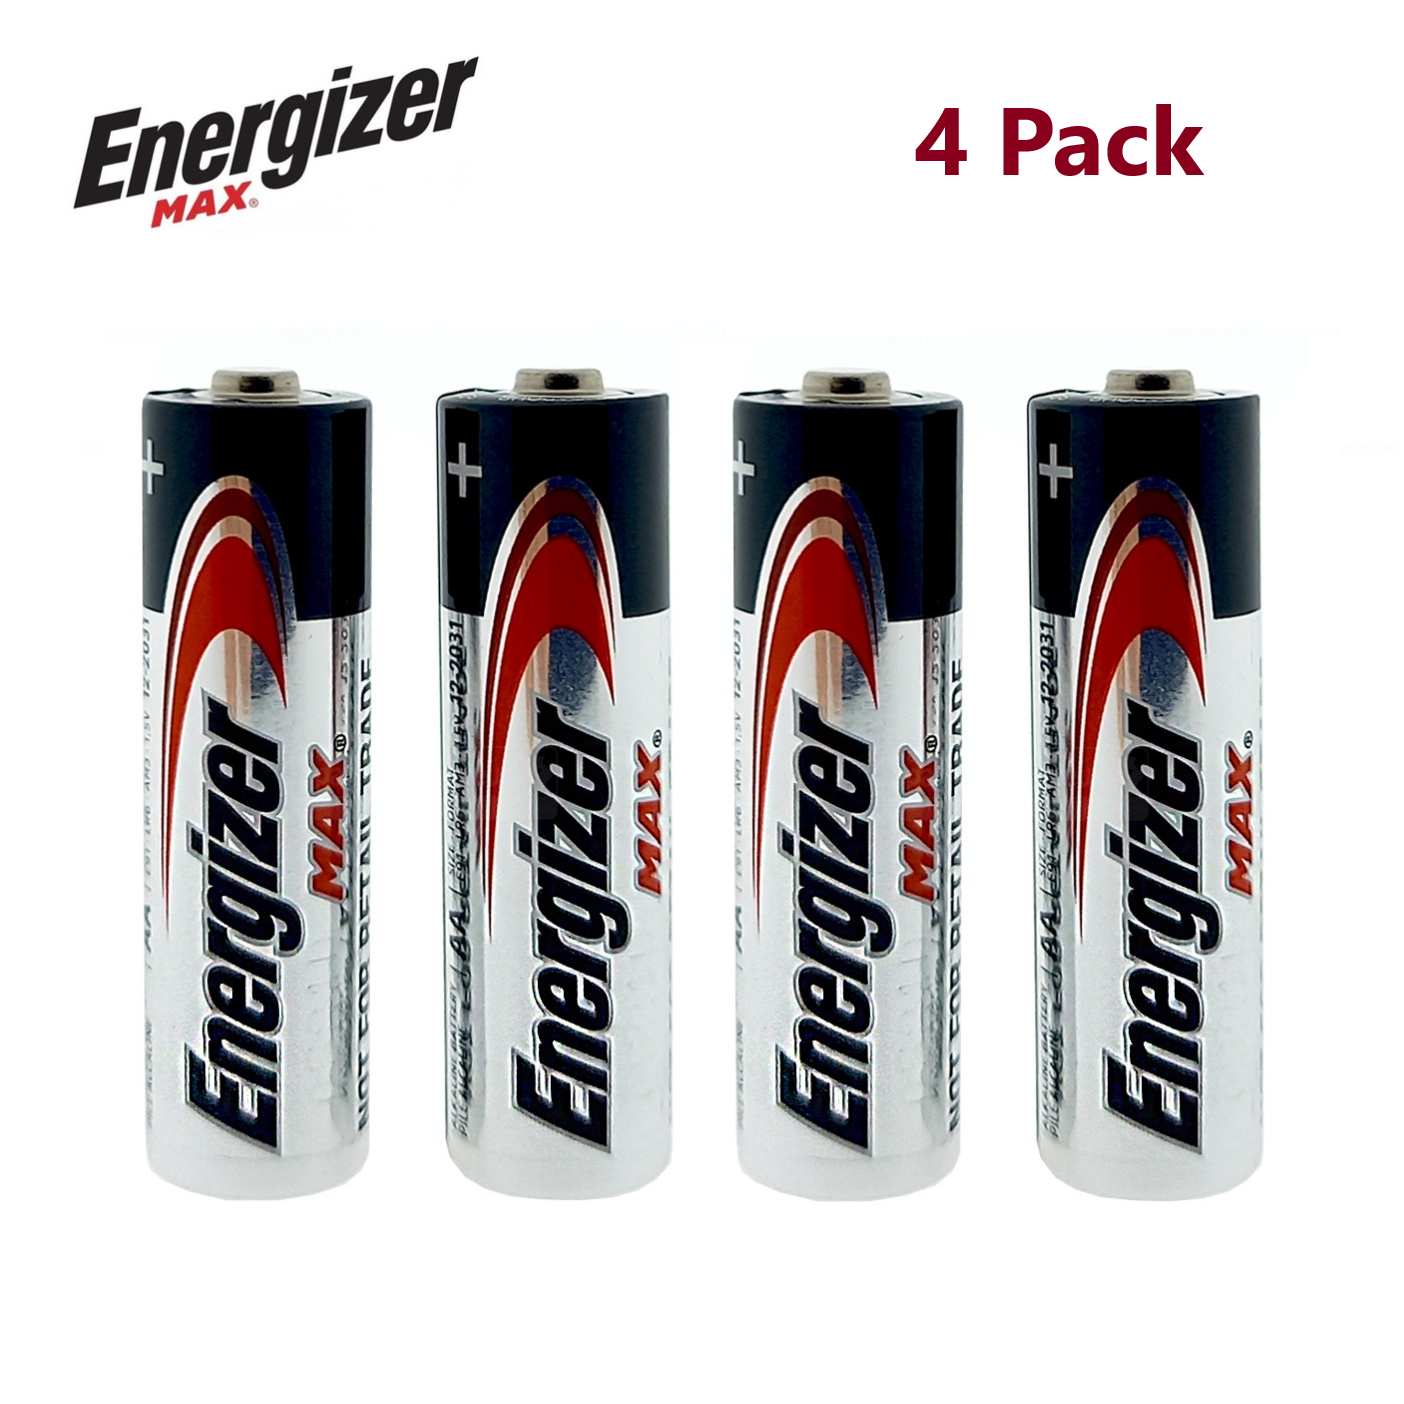 Energizer Max AA Batteries. Pack 4